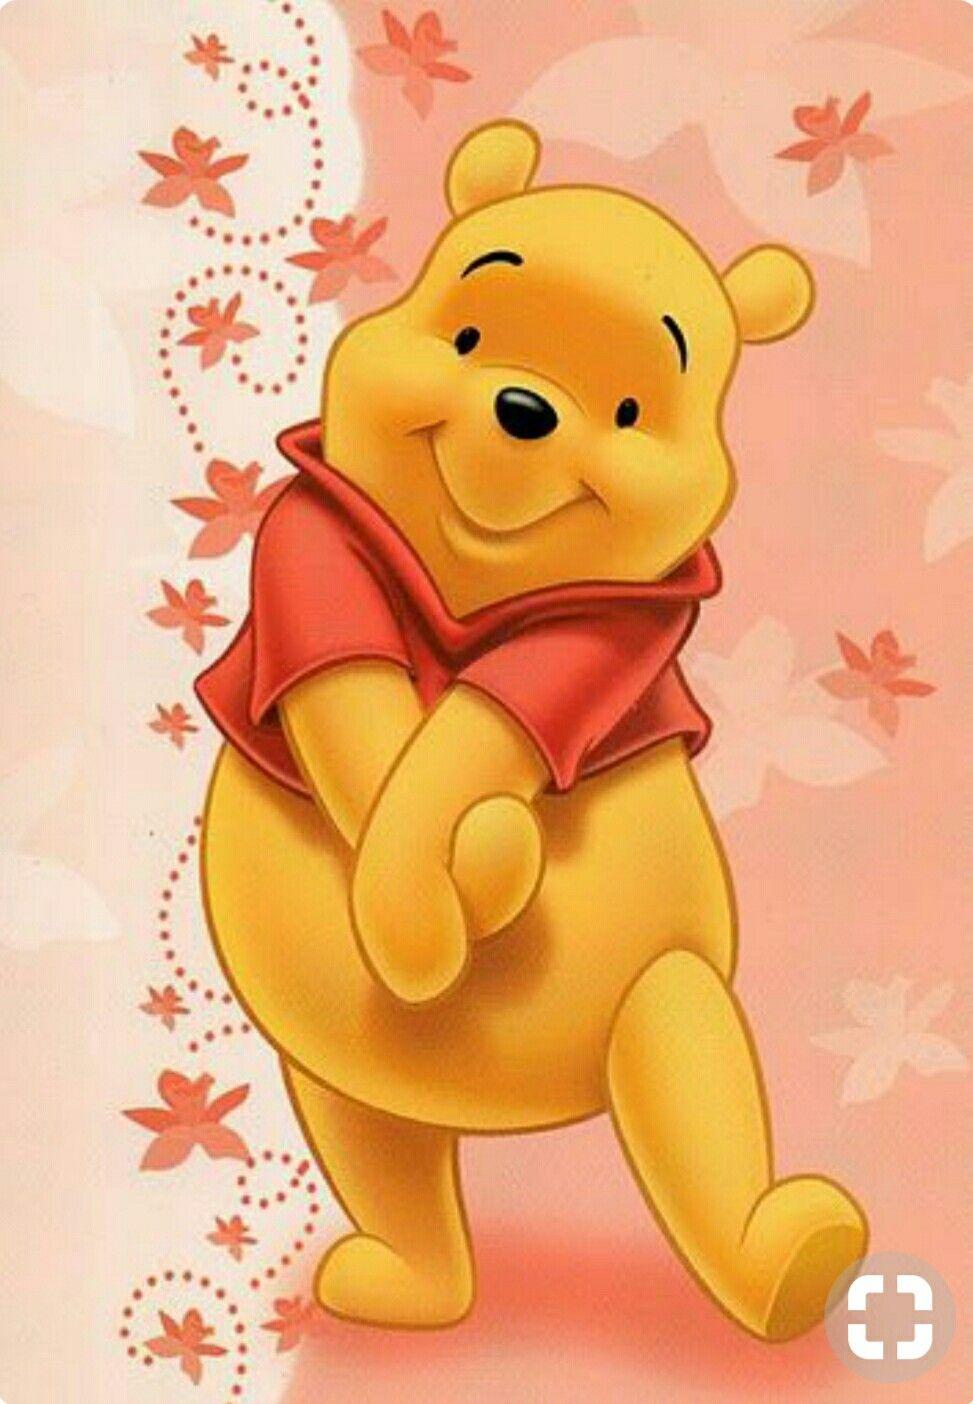 All about love. Winnie the pooh